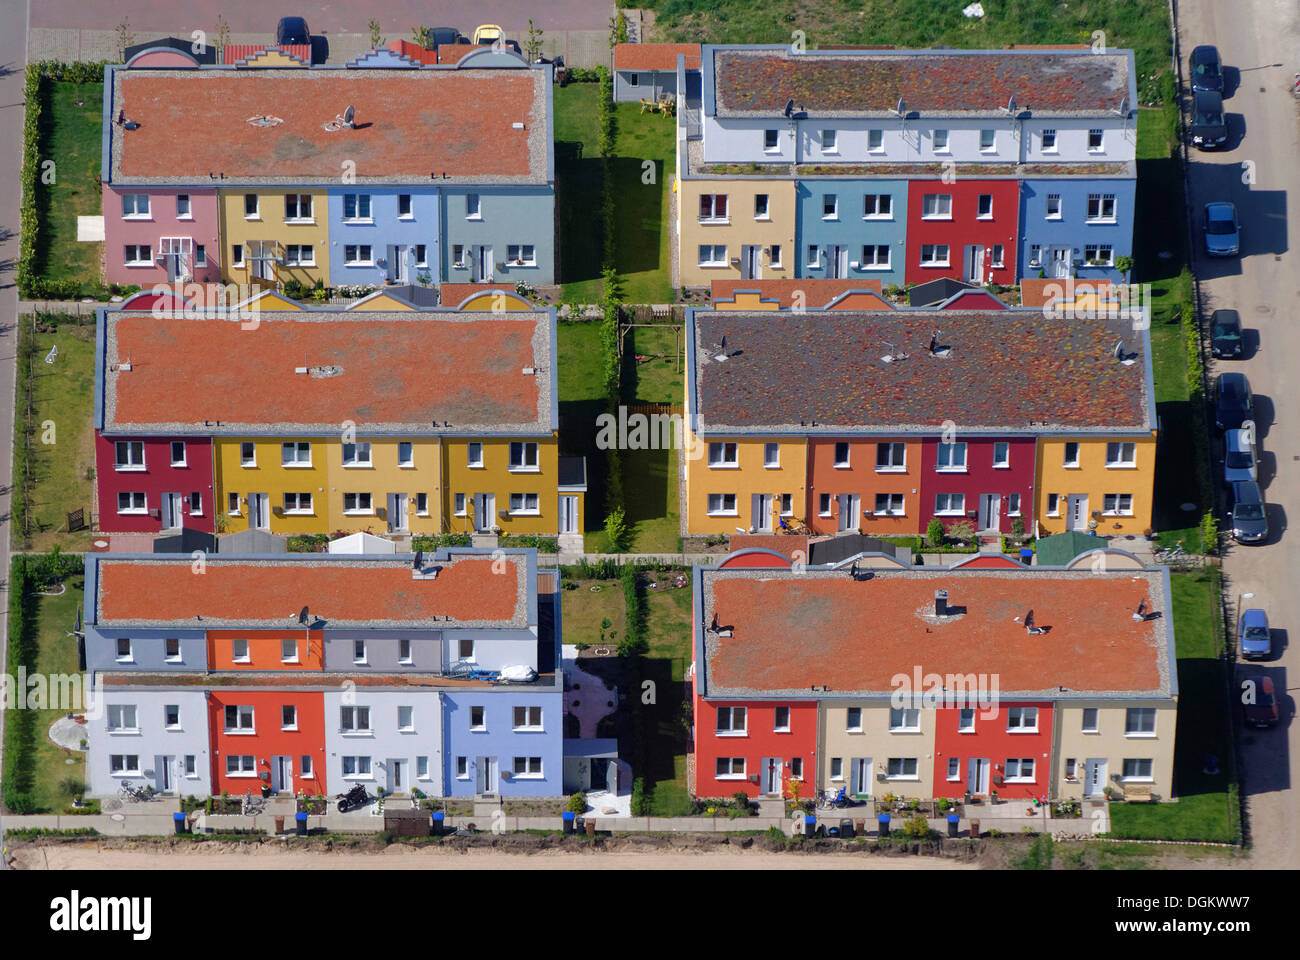 Aerial view, colourful row of houses in the university district of Luebeck, Luebeck, Lübeck, Schleswig-Holstein, Germany Stock Photo